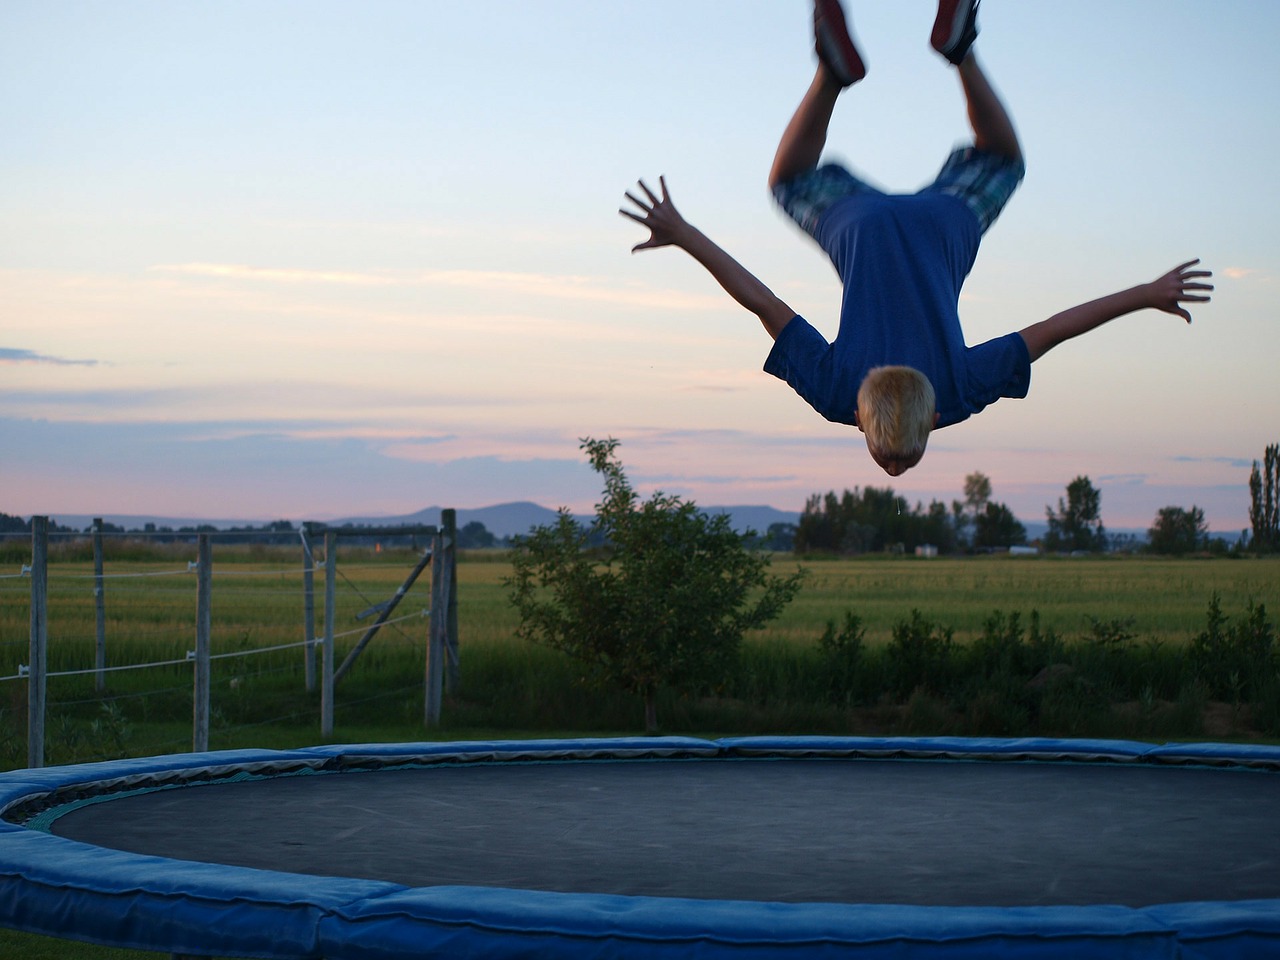 Children & Trampolines: What You Need to Know